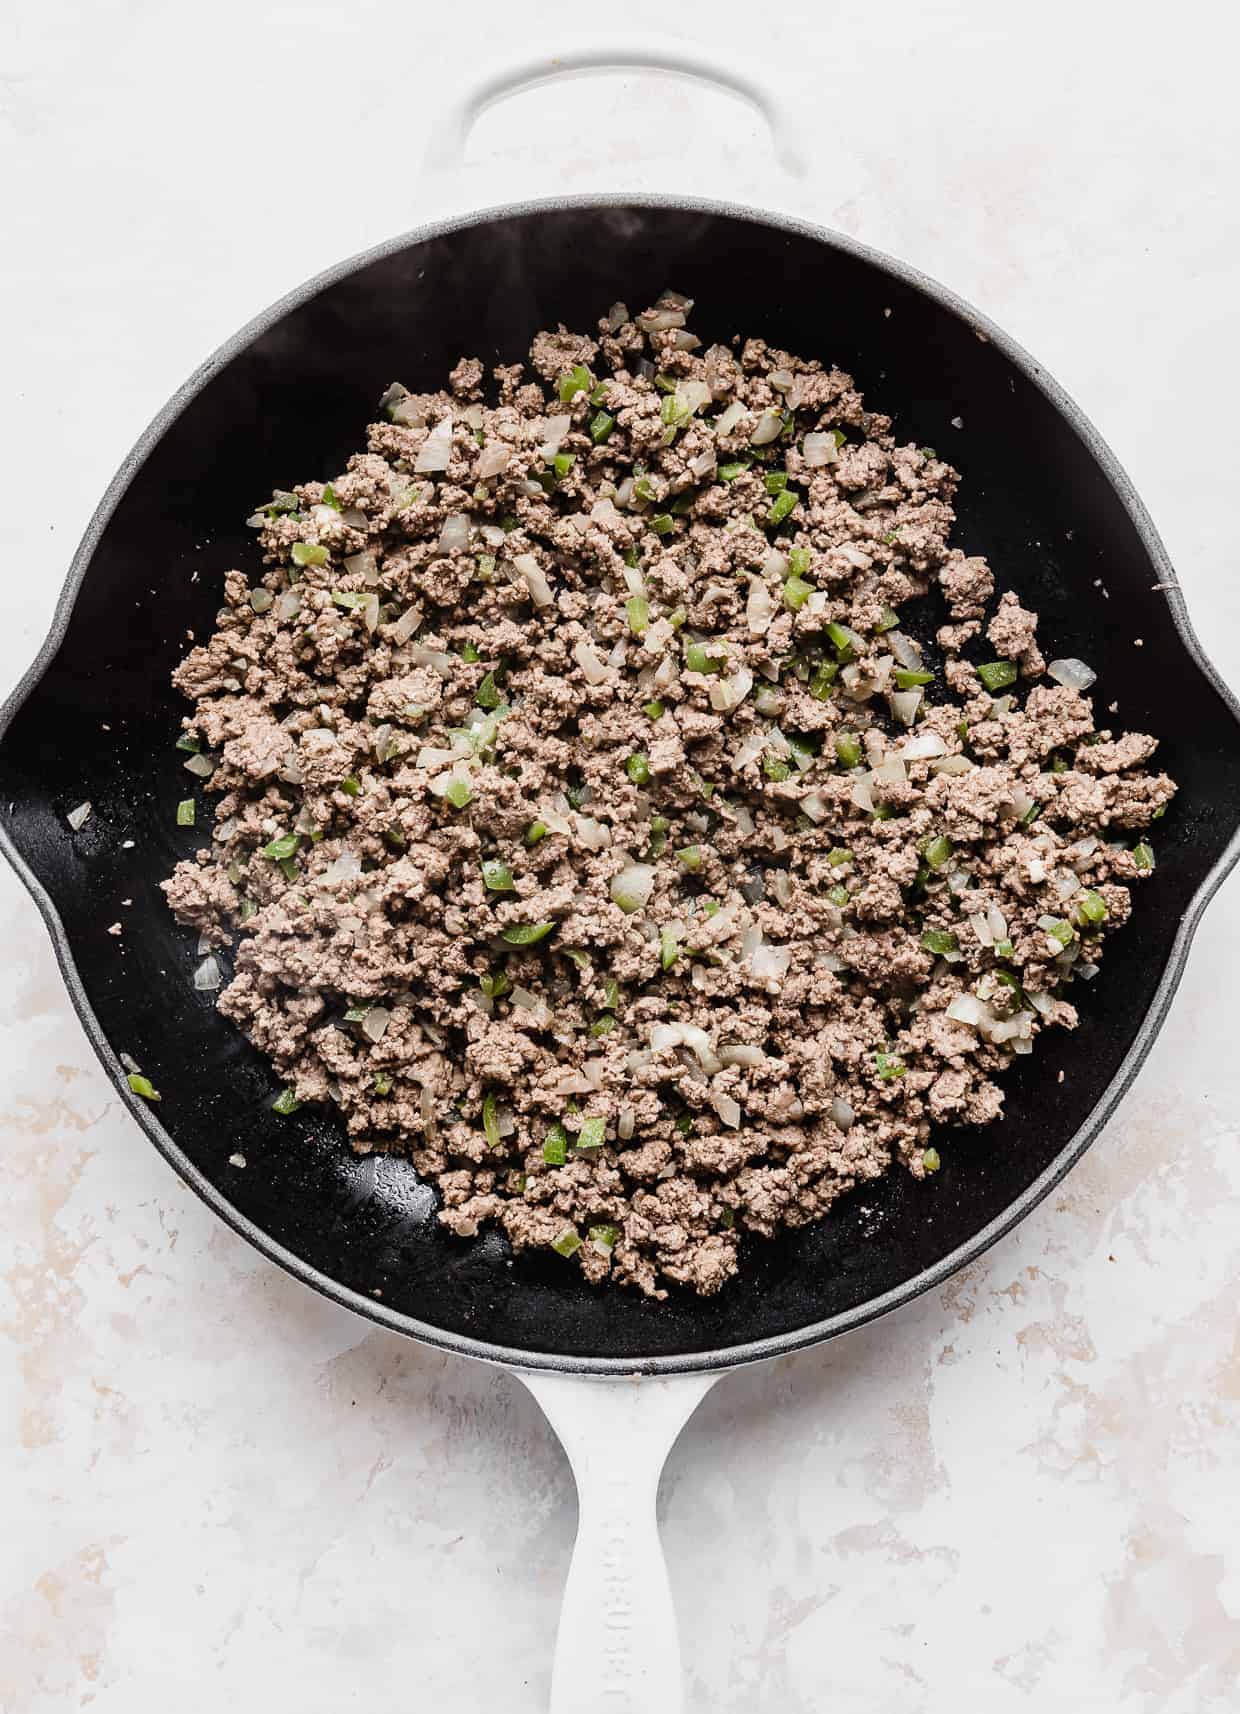 A large skillet full of cooked ground beef, diced green pepper, and onion.